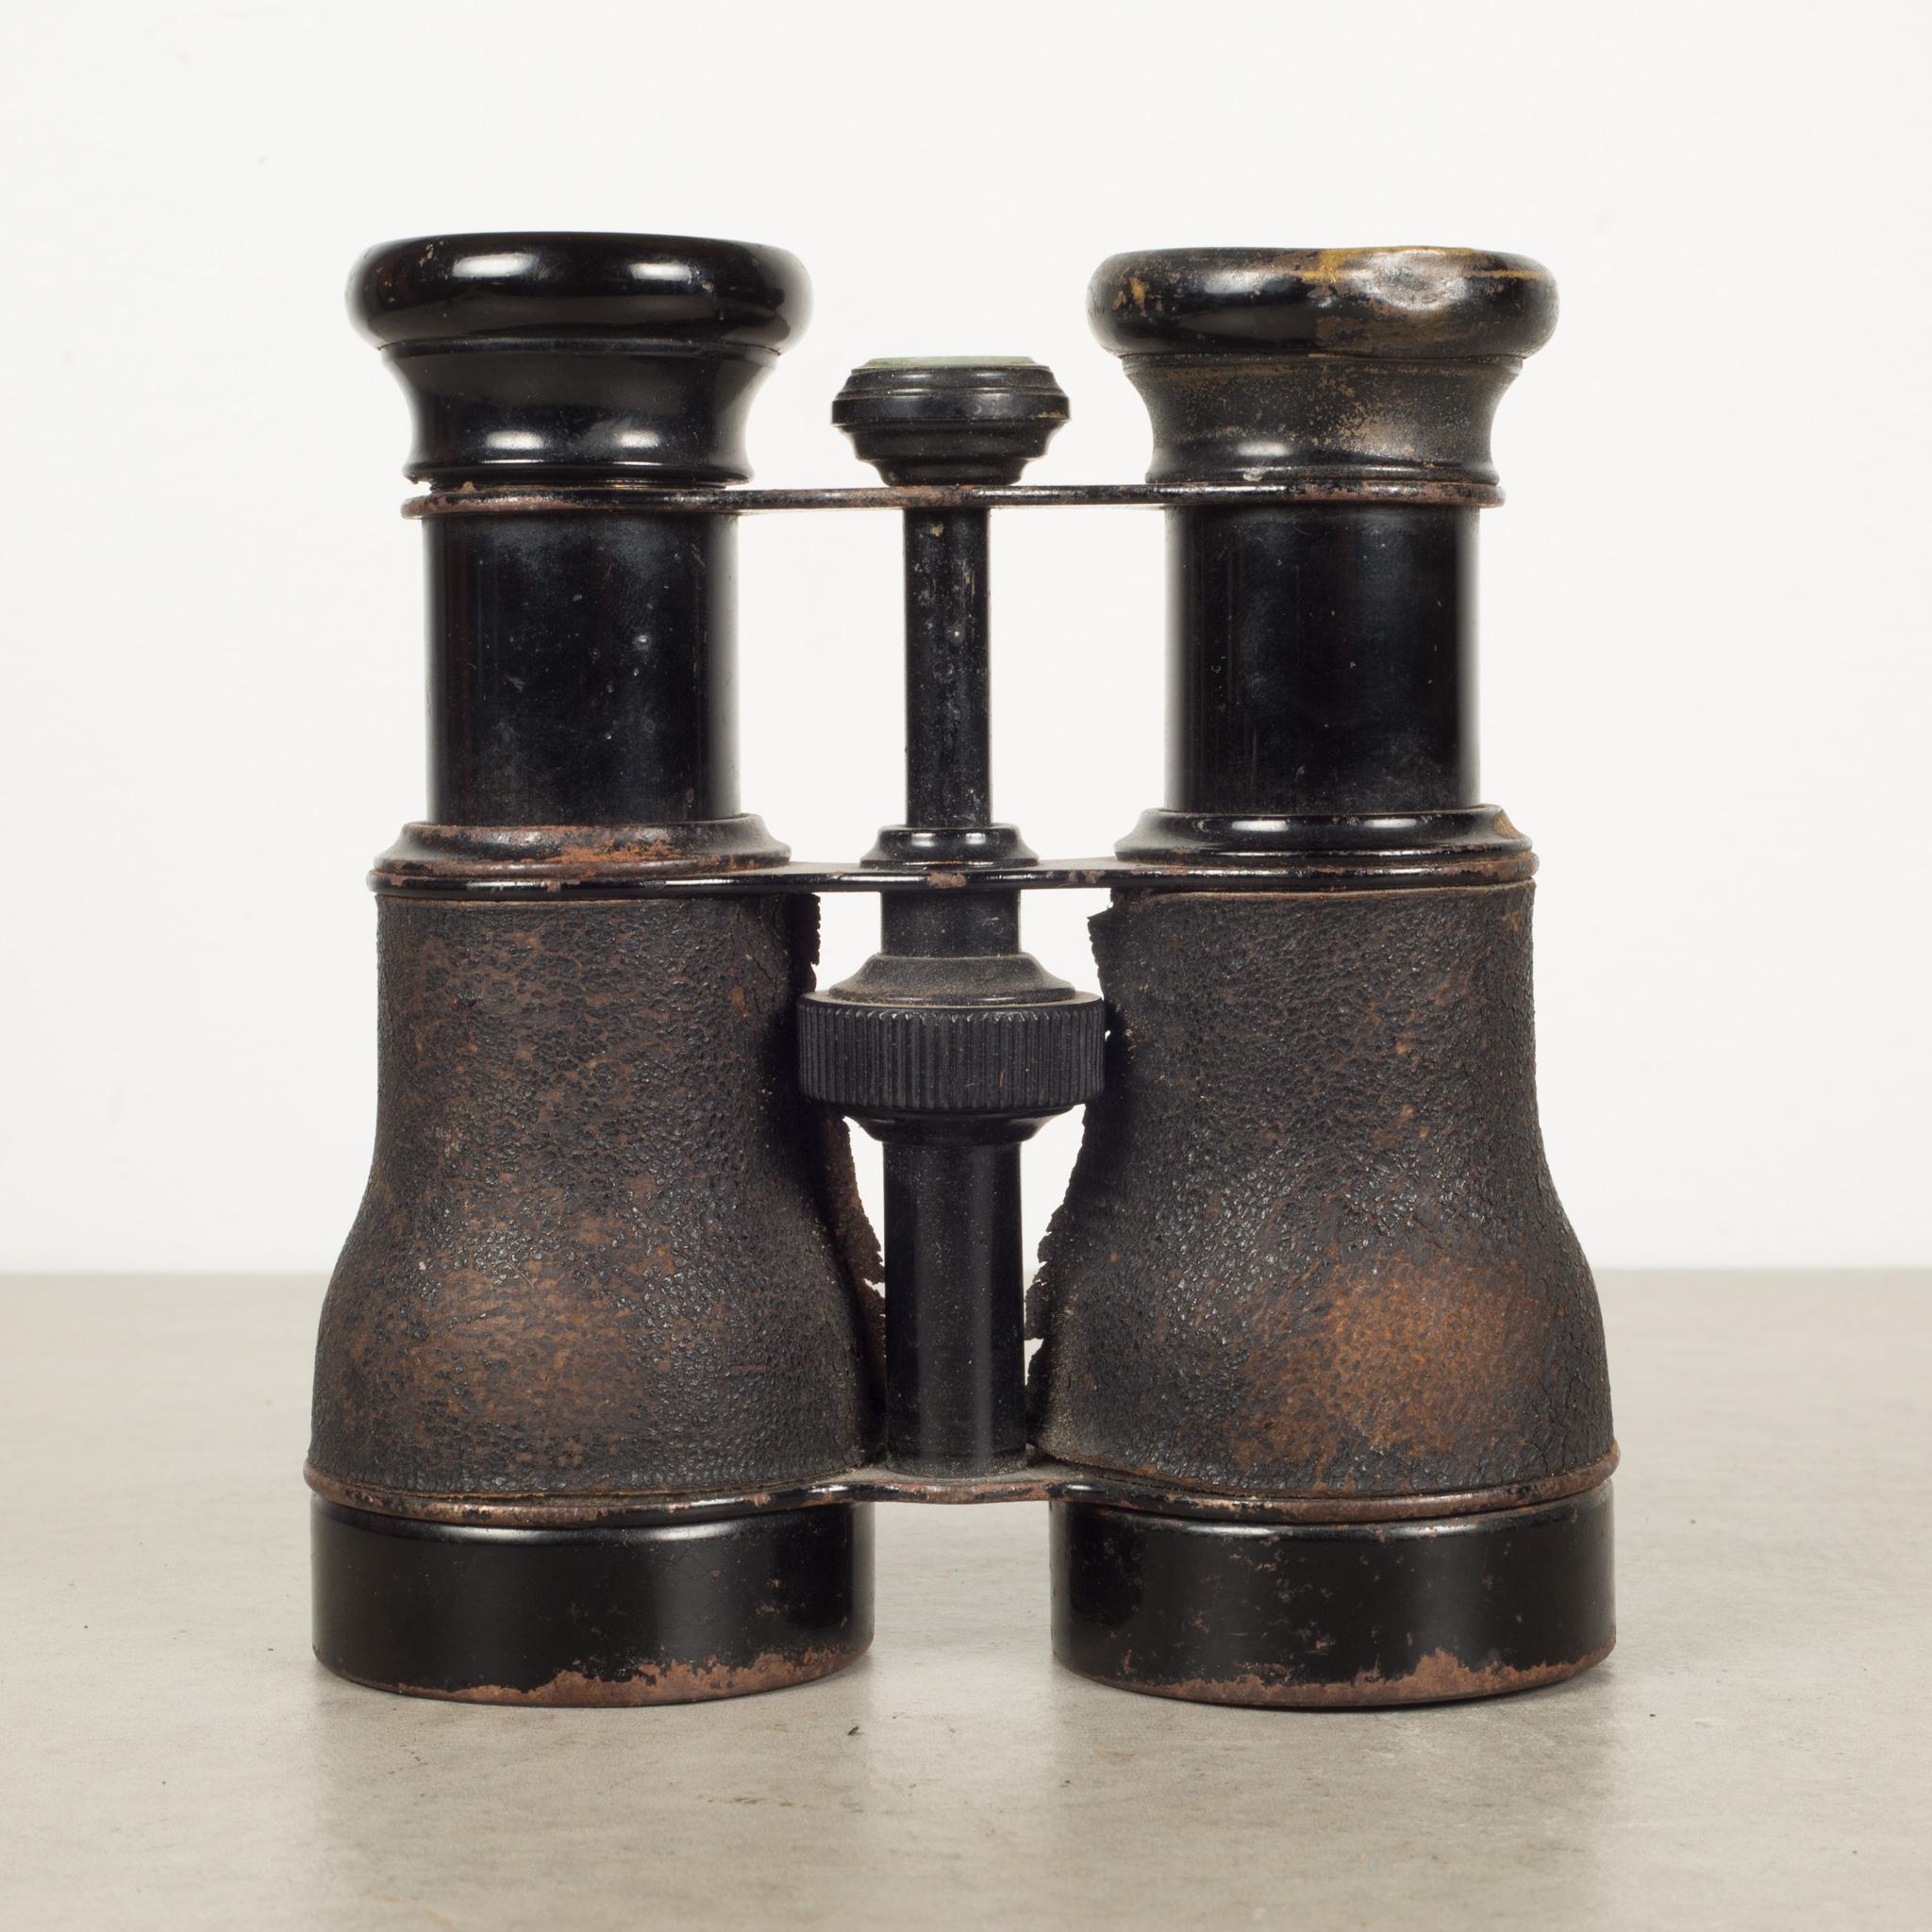 ABOUT

This is an original pair of leather wrapped French navy binoculars with a working compass on the end. 